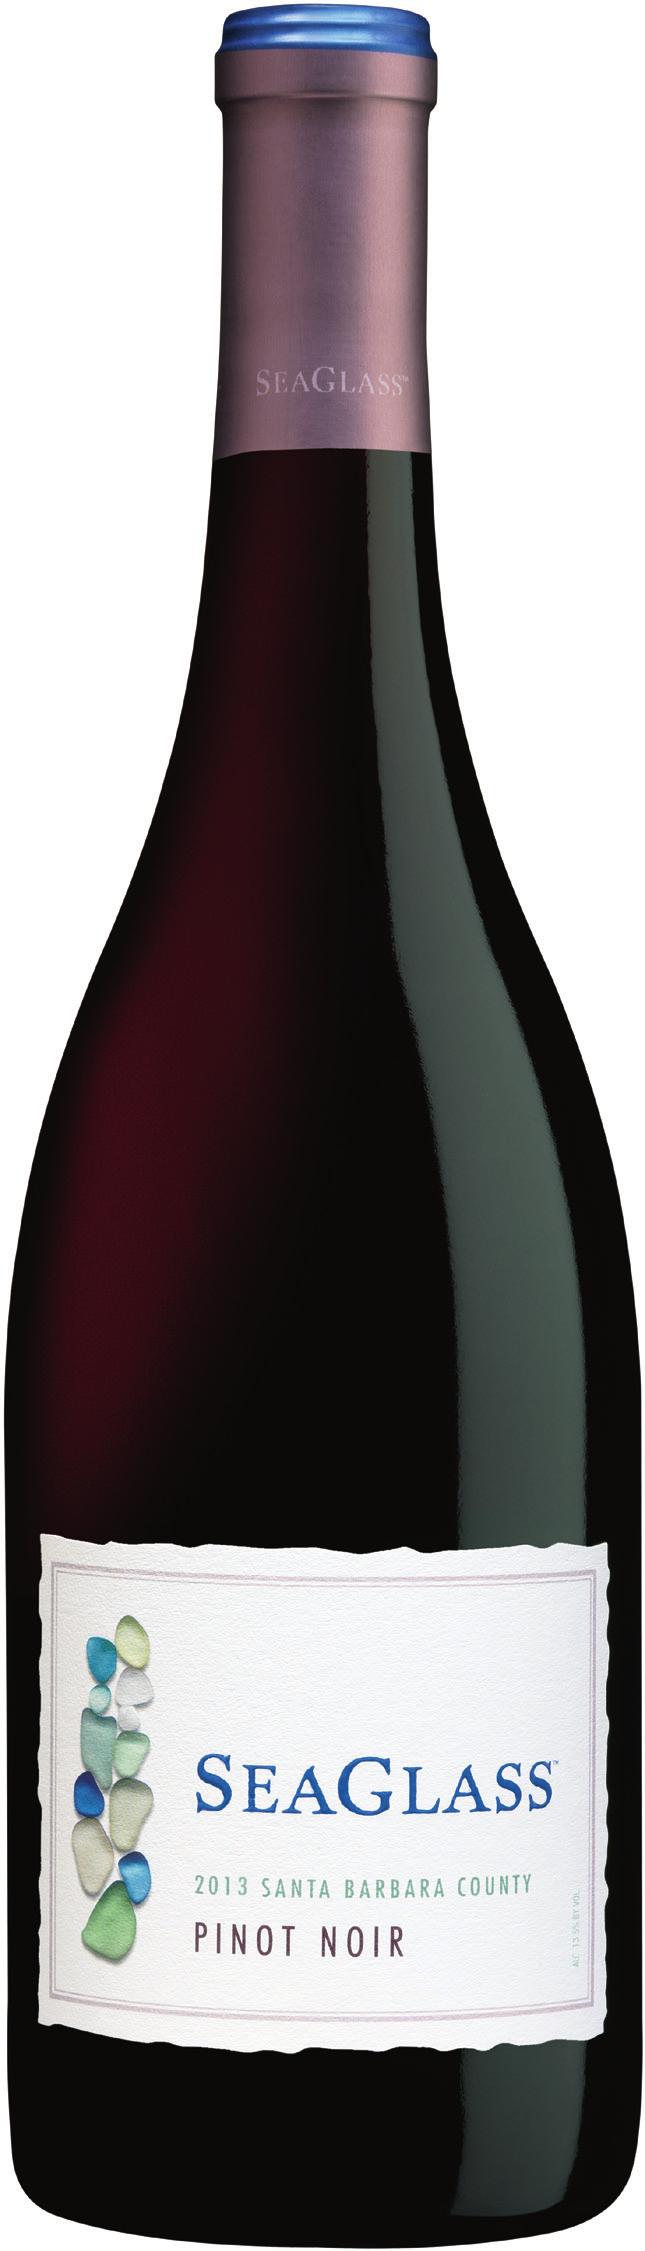 2013 PINOT NOIR Our Los Alamos Pinot Noir vineyard is nestled in Santa Barbara s rolling hills, a climate considered by many to be ideal for Burgundian varietals.